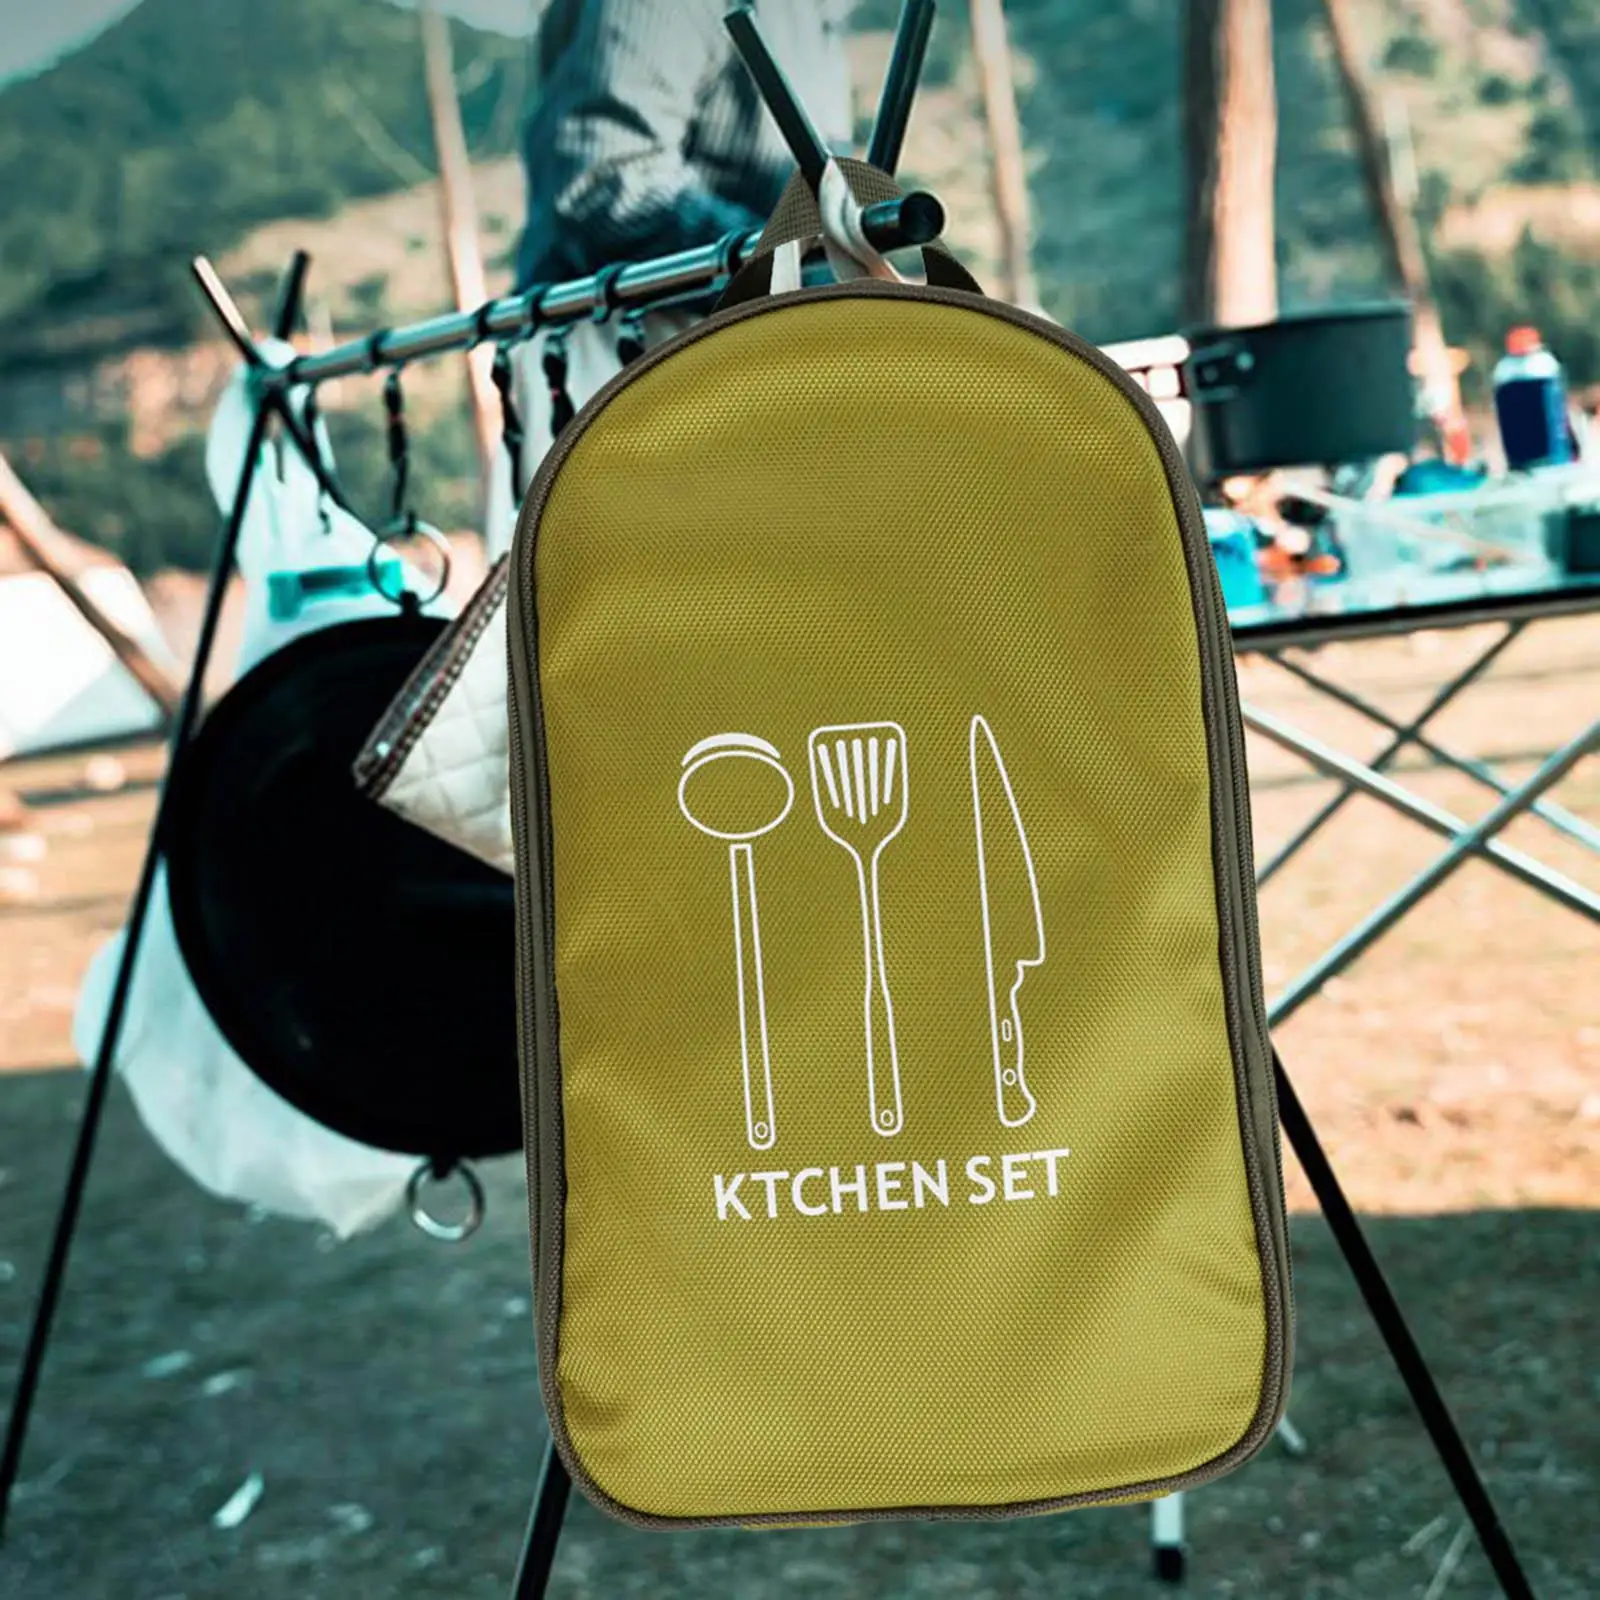 Cooking Utensils Organizer Bag Backpacking for Camp Cookware